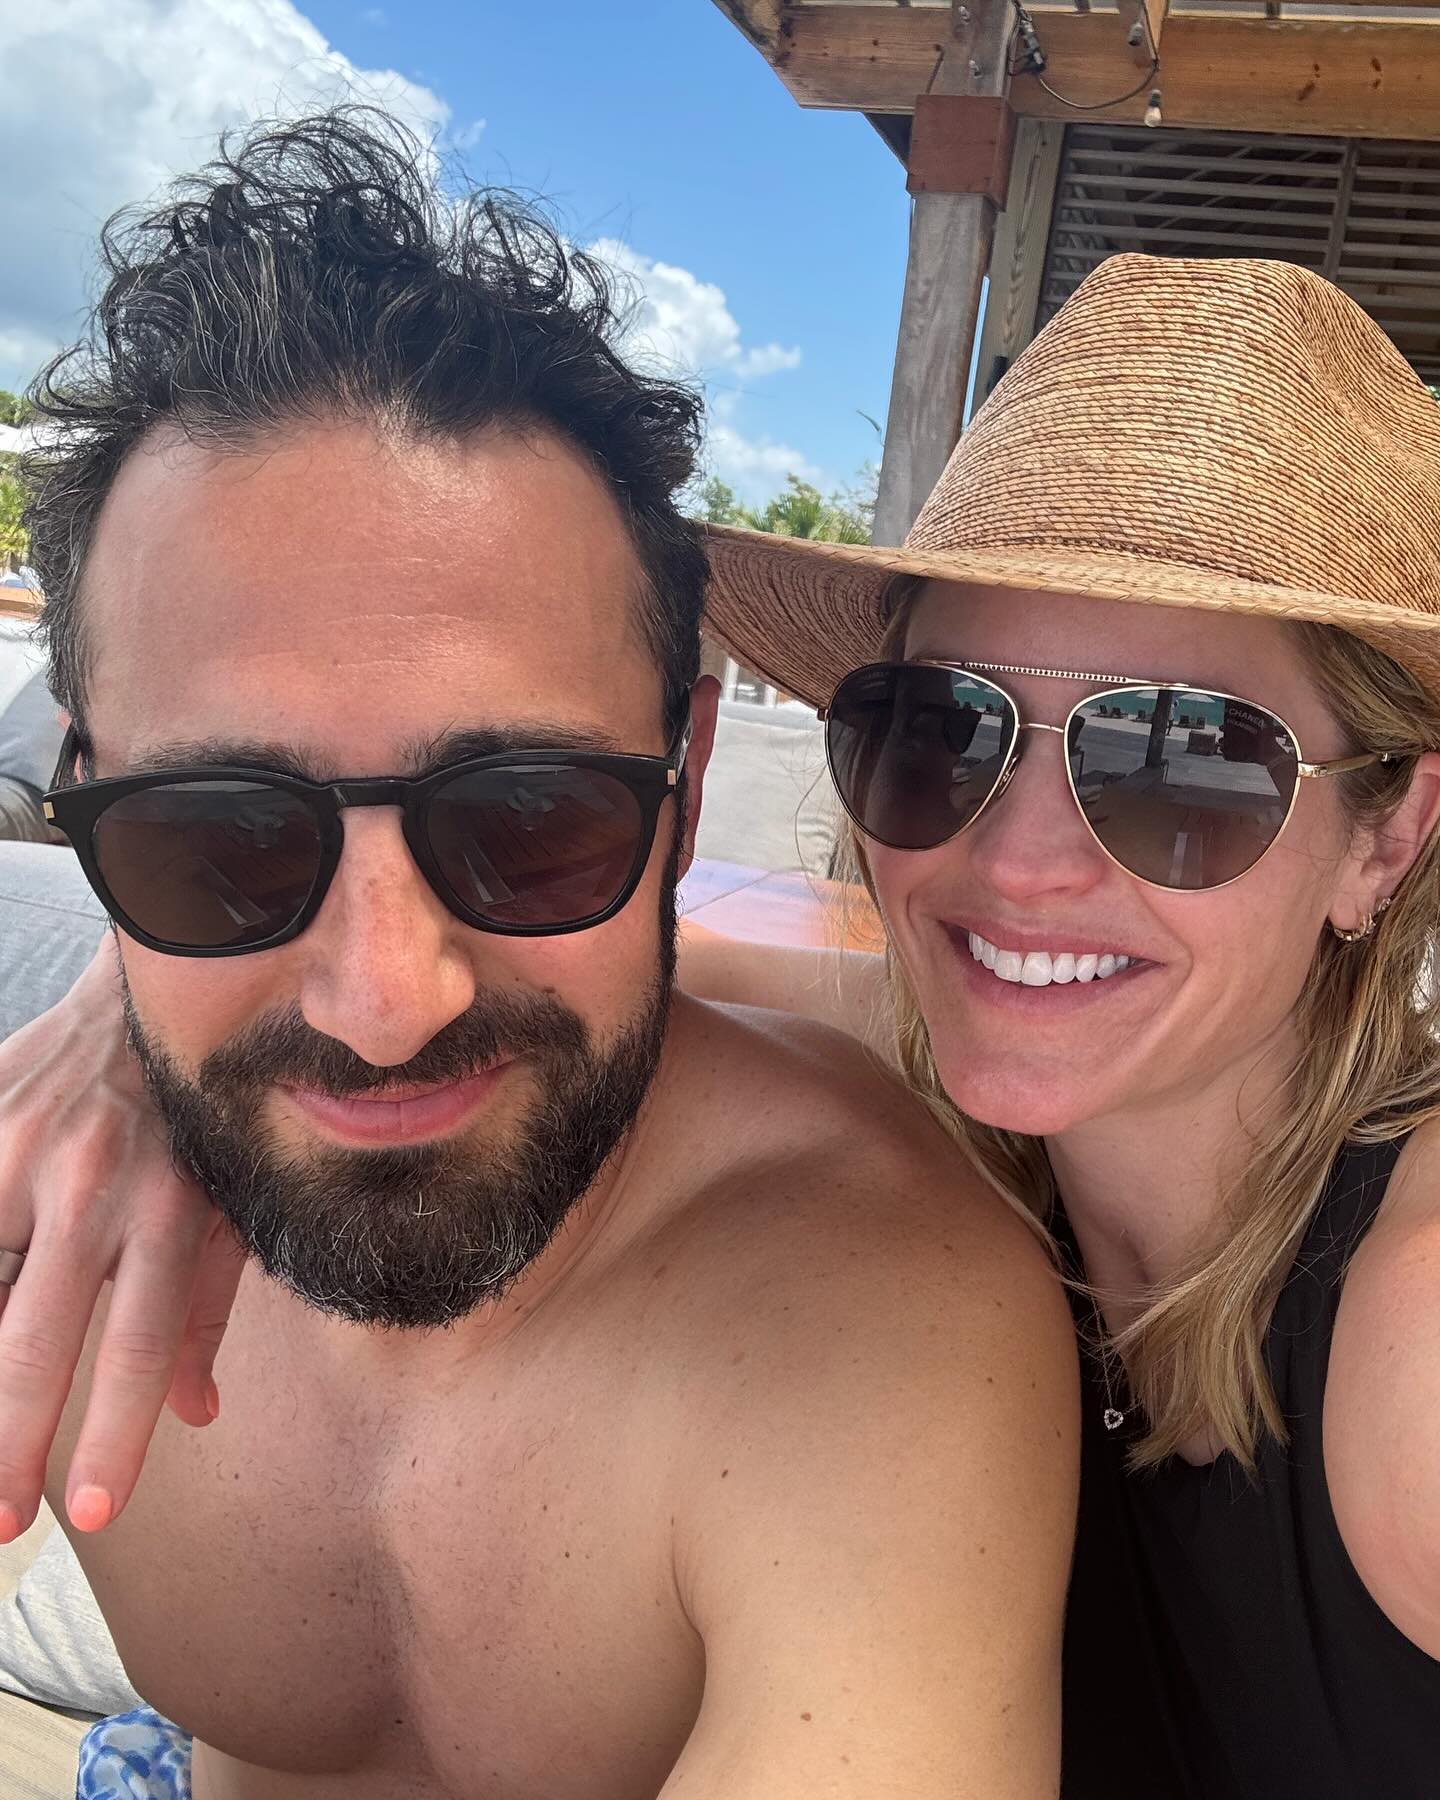 She shared a few photos from the trip with her husband Max Shifrin